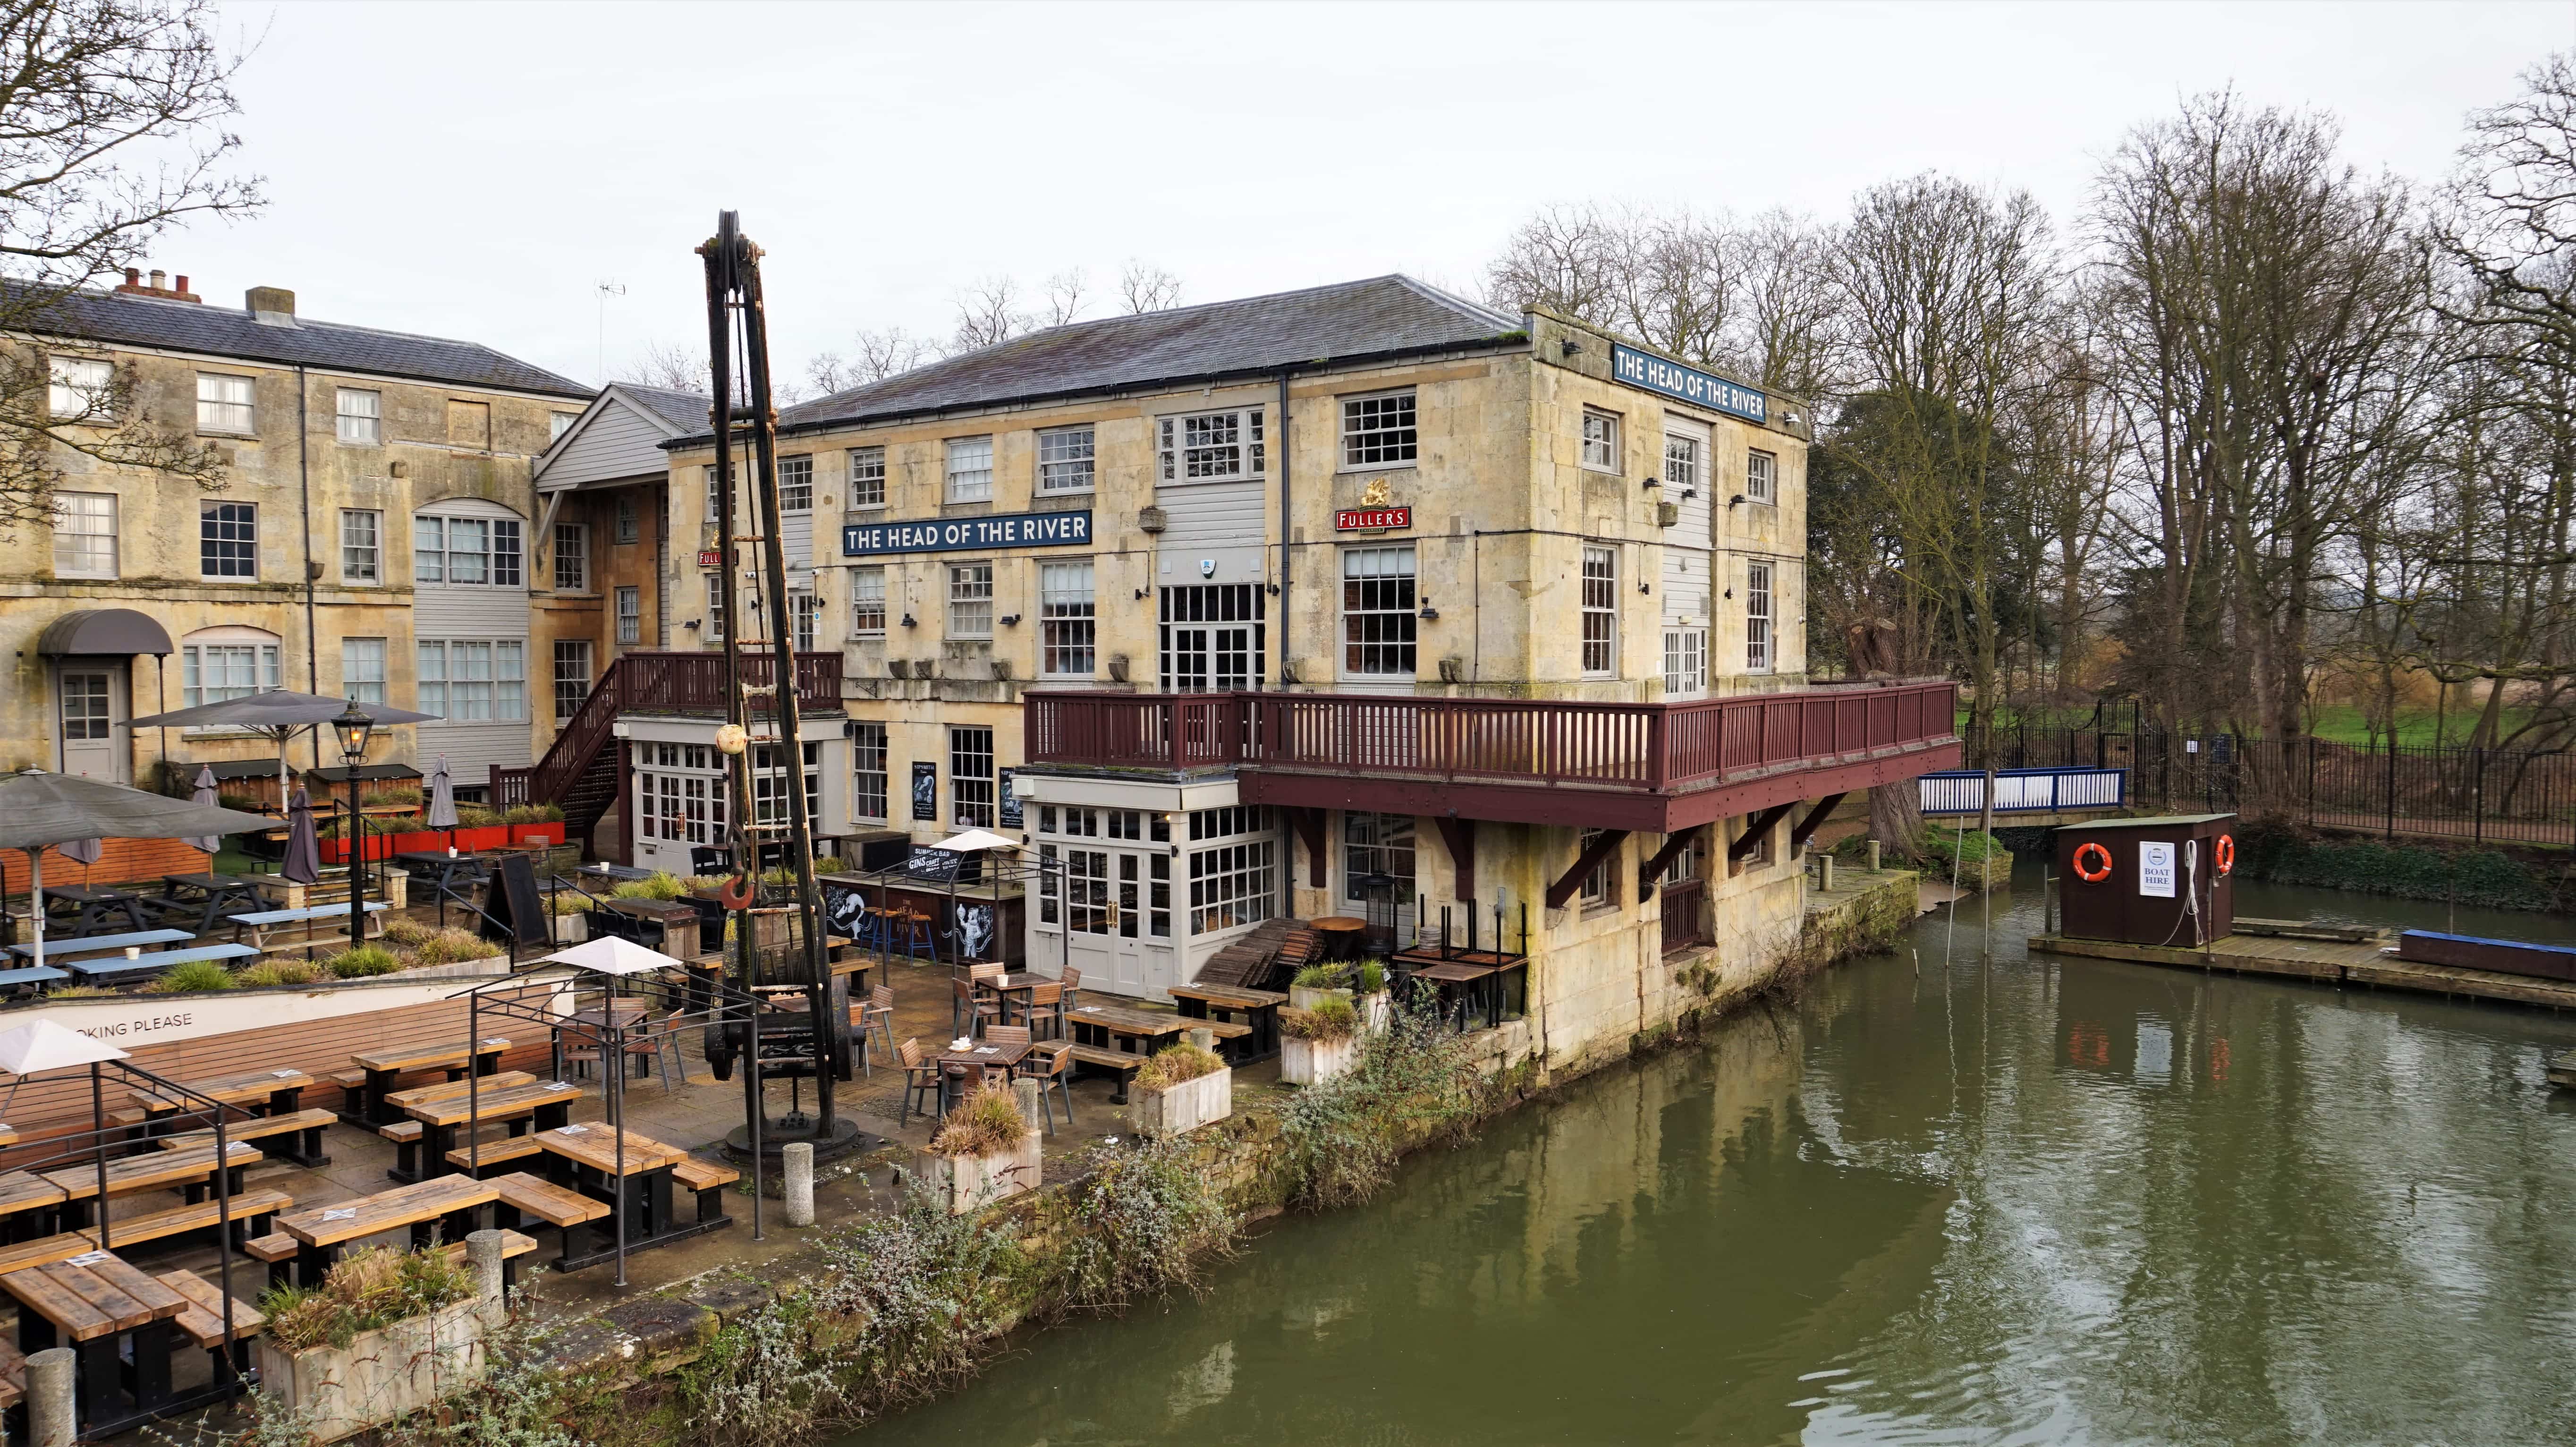 The Head of the River, Oxford